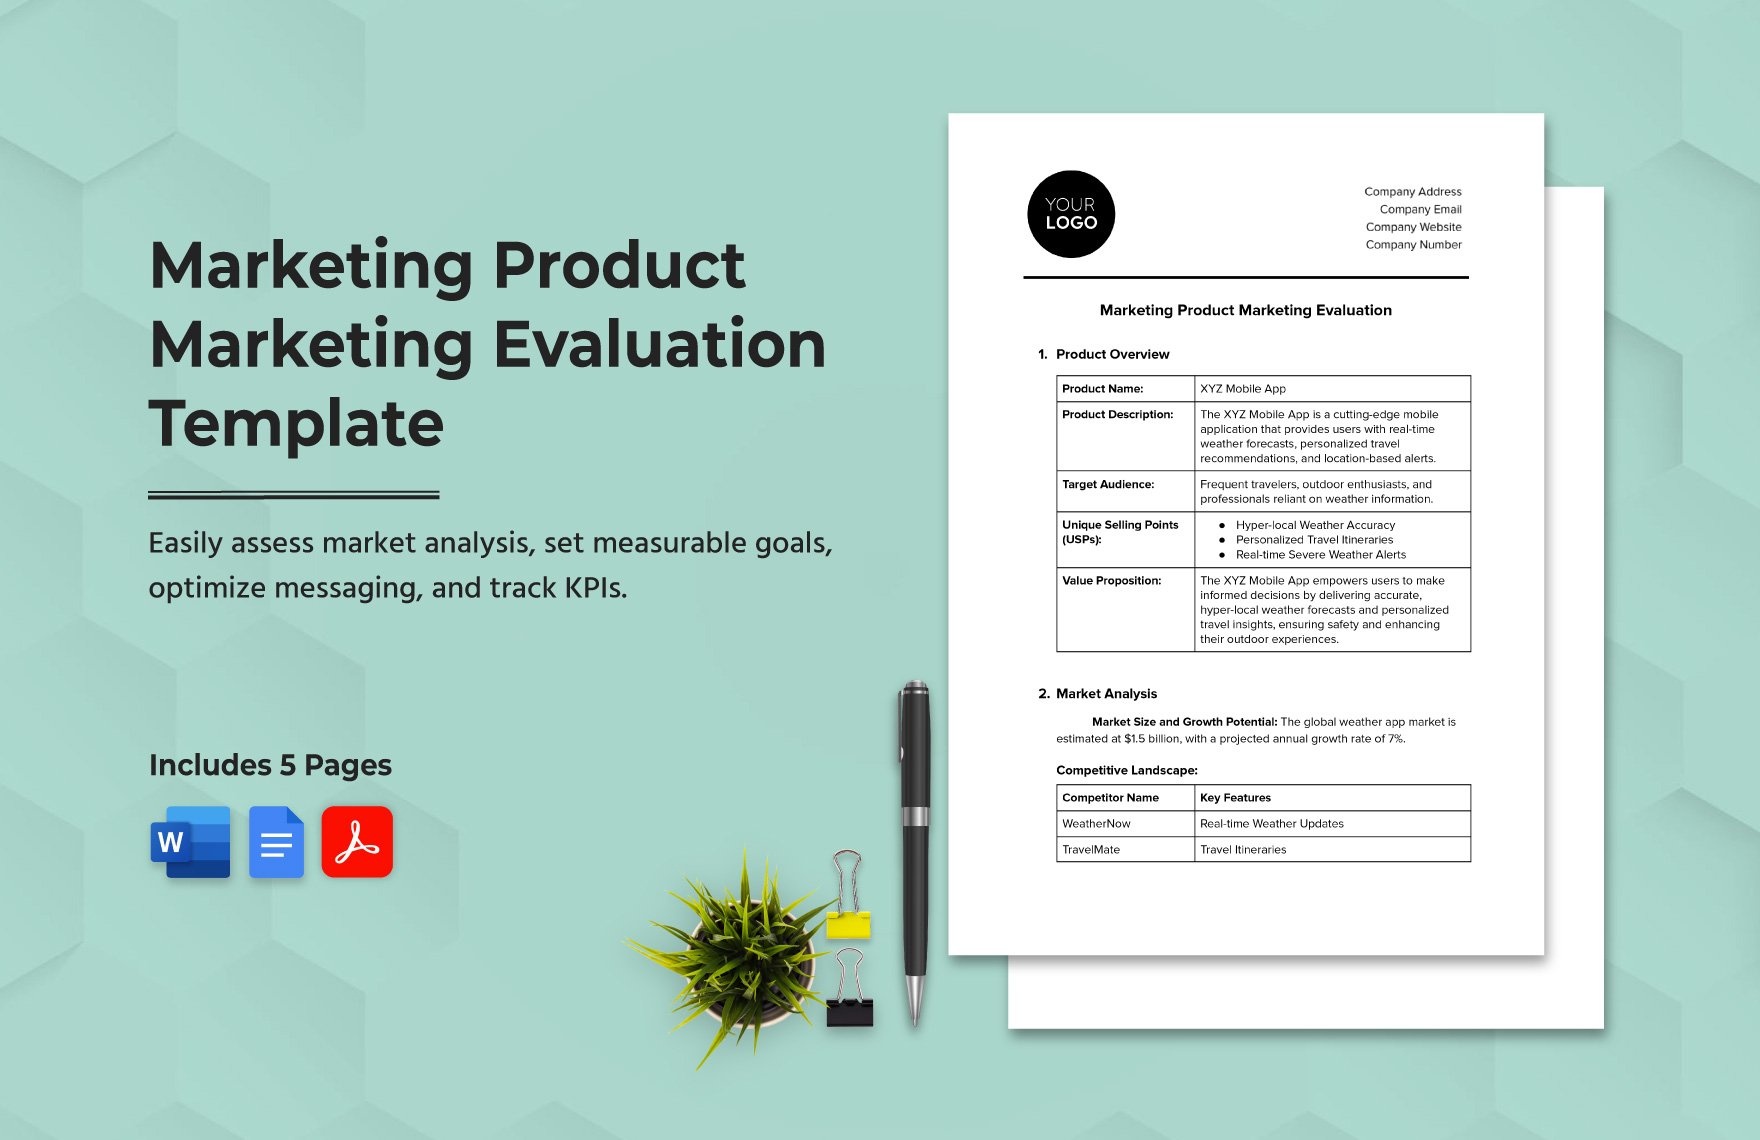 Marketing Product Marketing Evaluation Template in Word, Google Docs, PDF